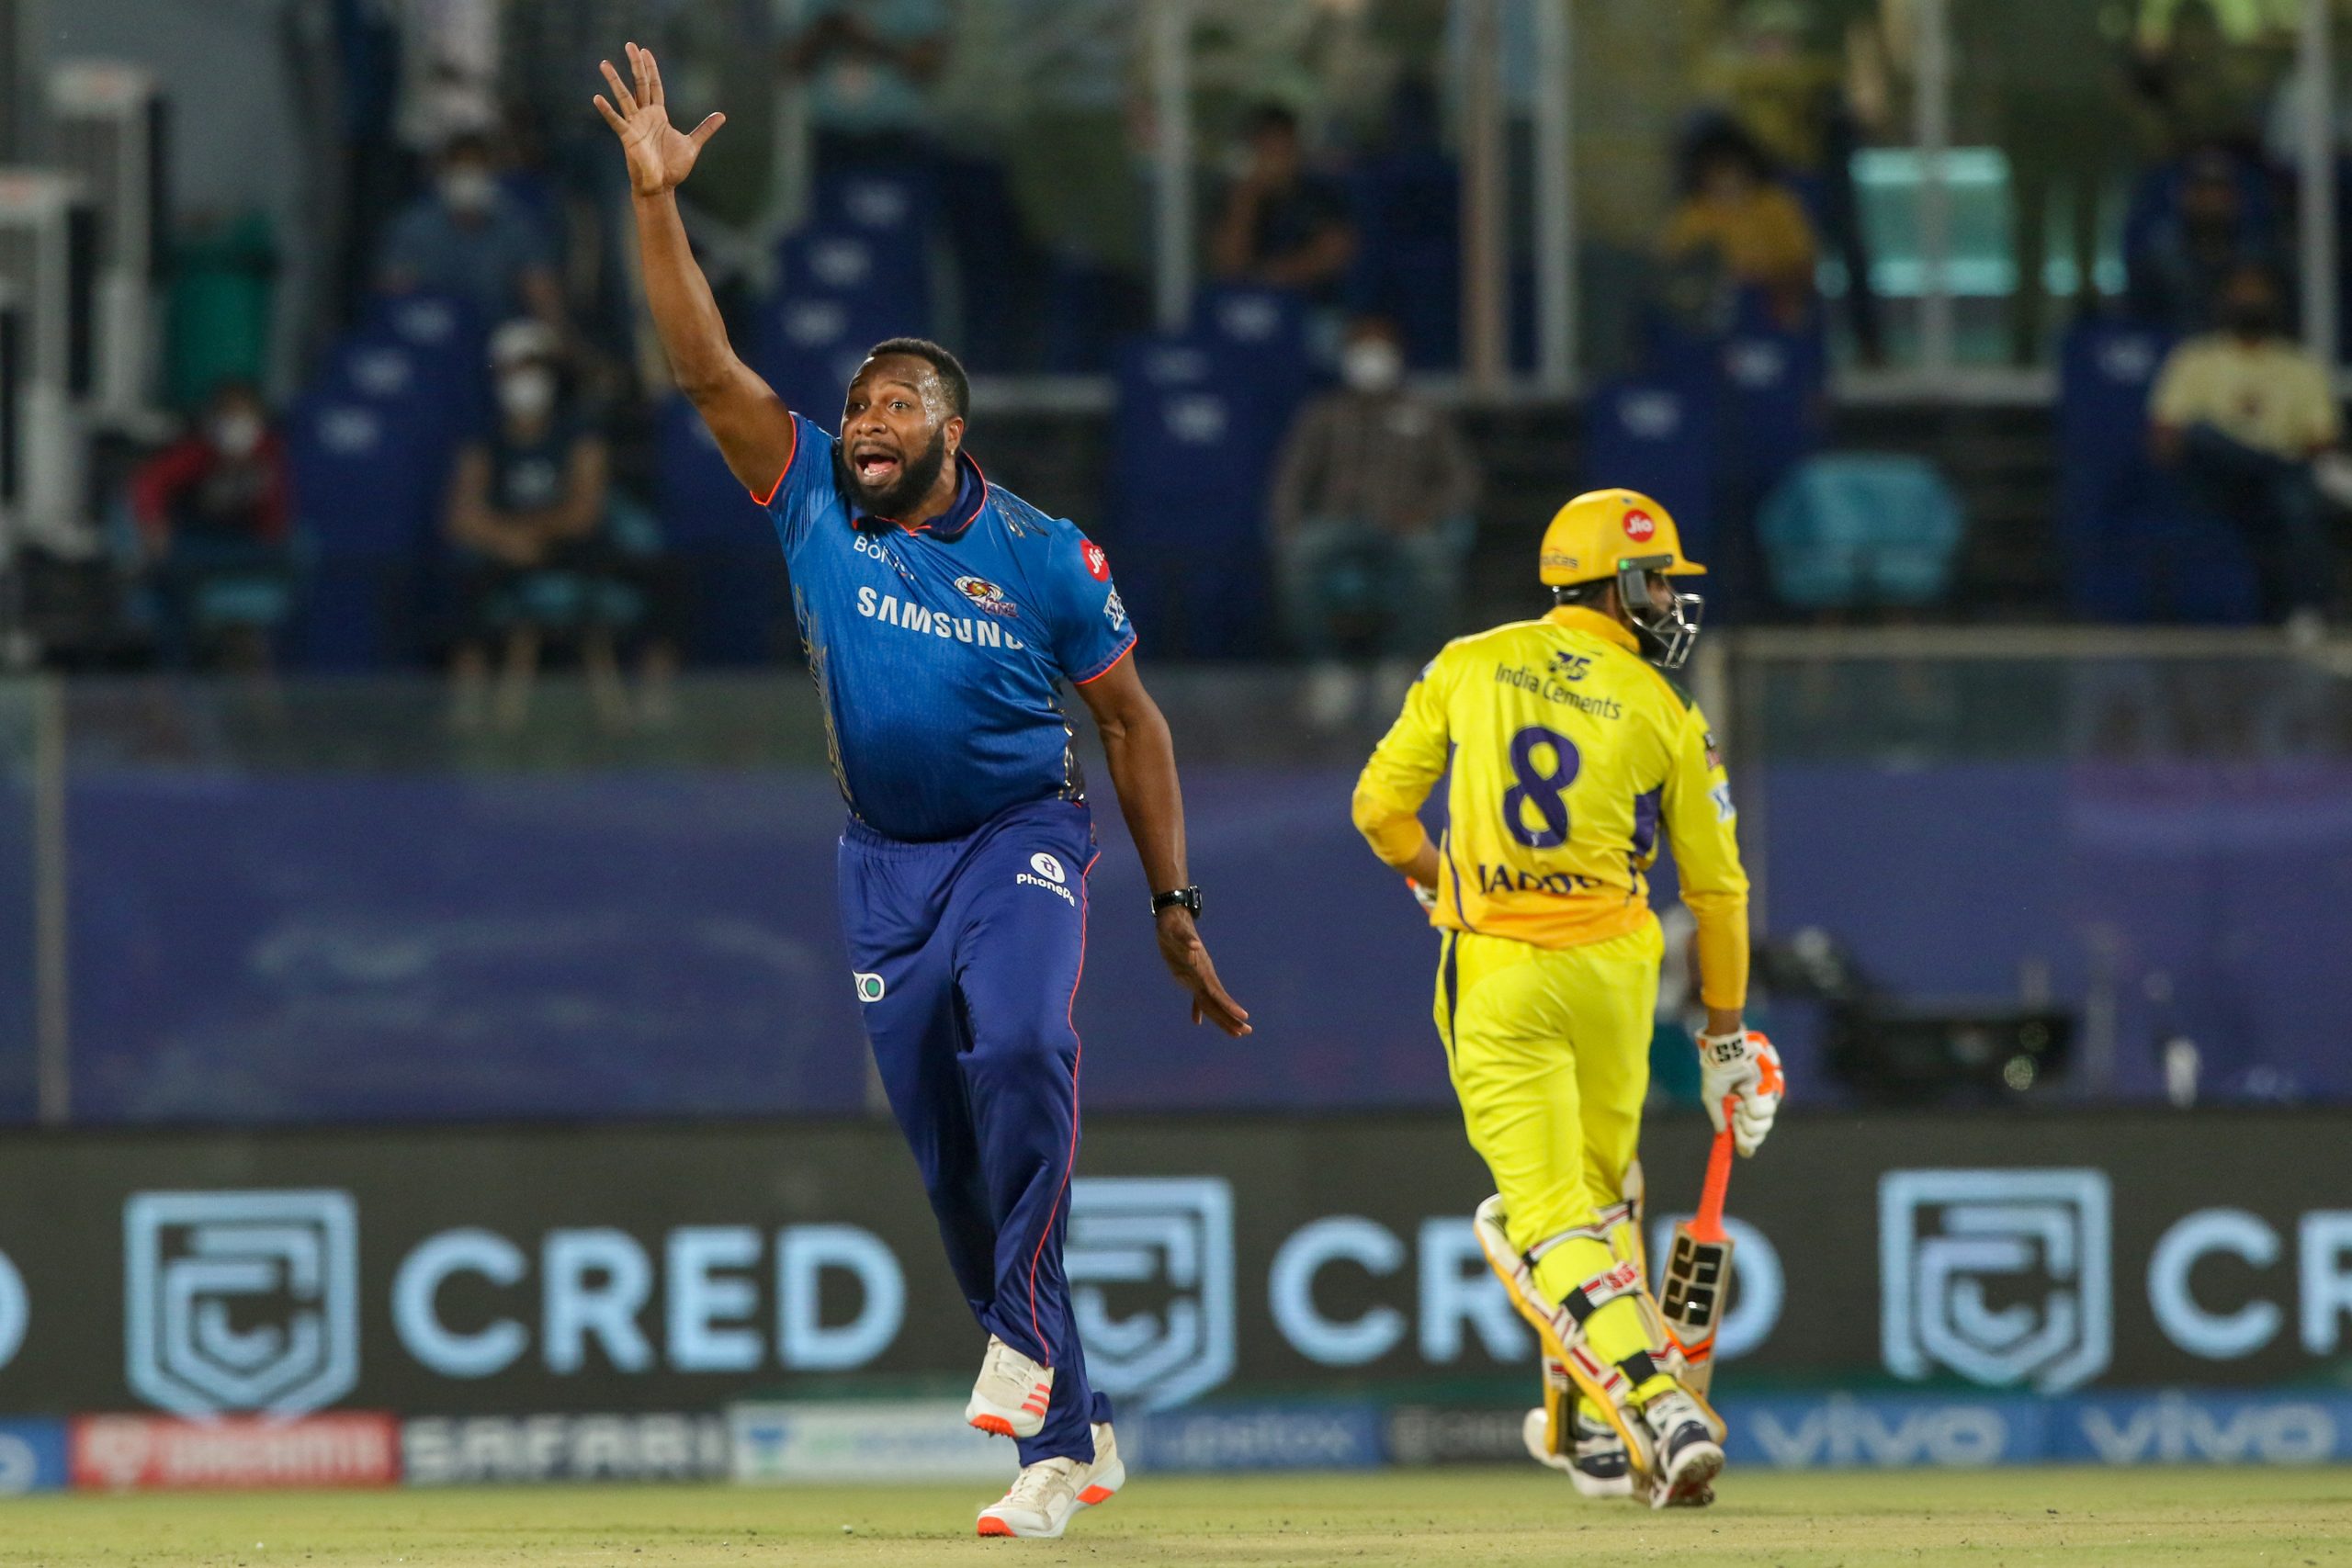 IPL 2021: How the teams fared in the India leg